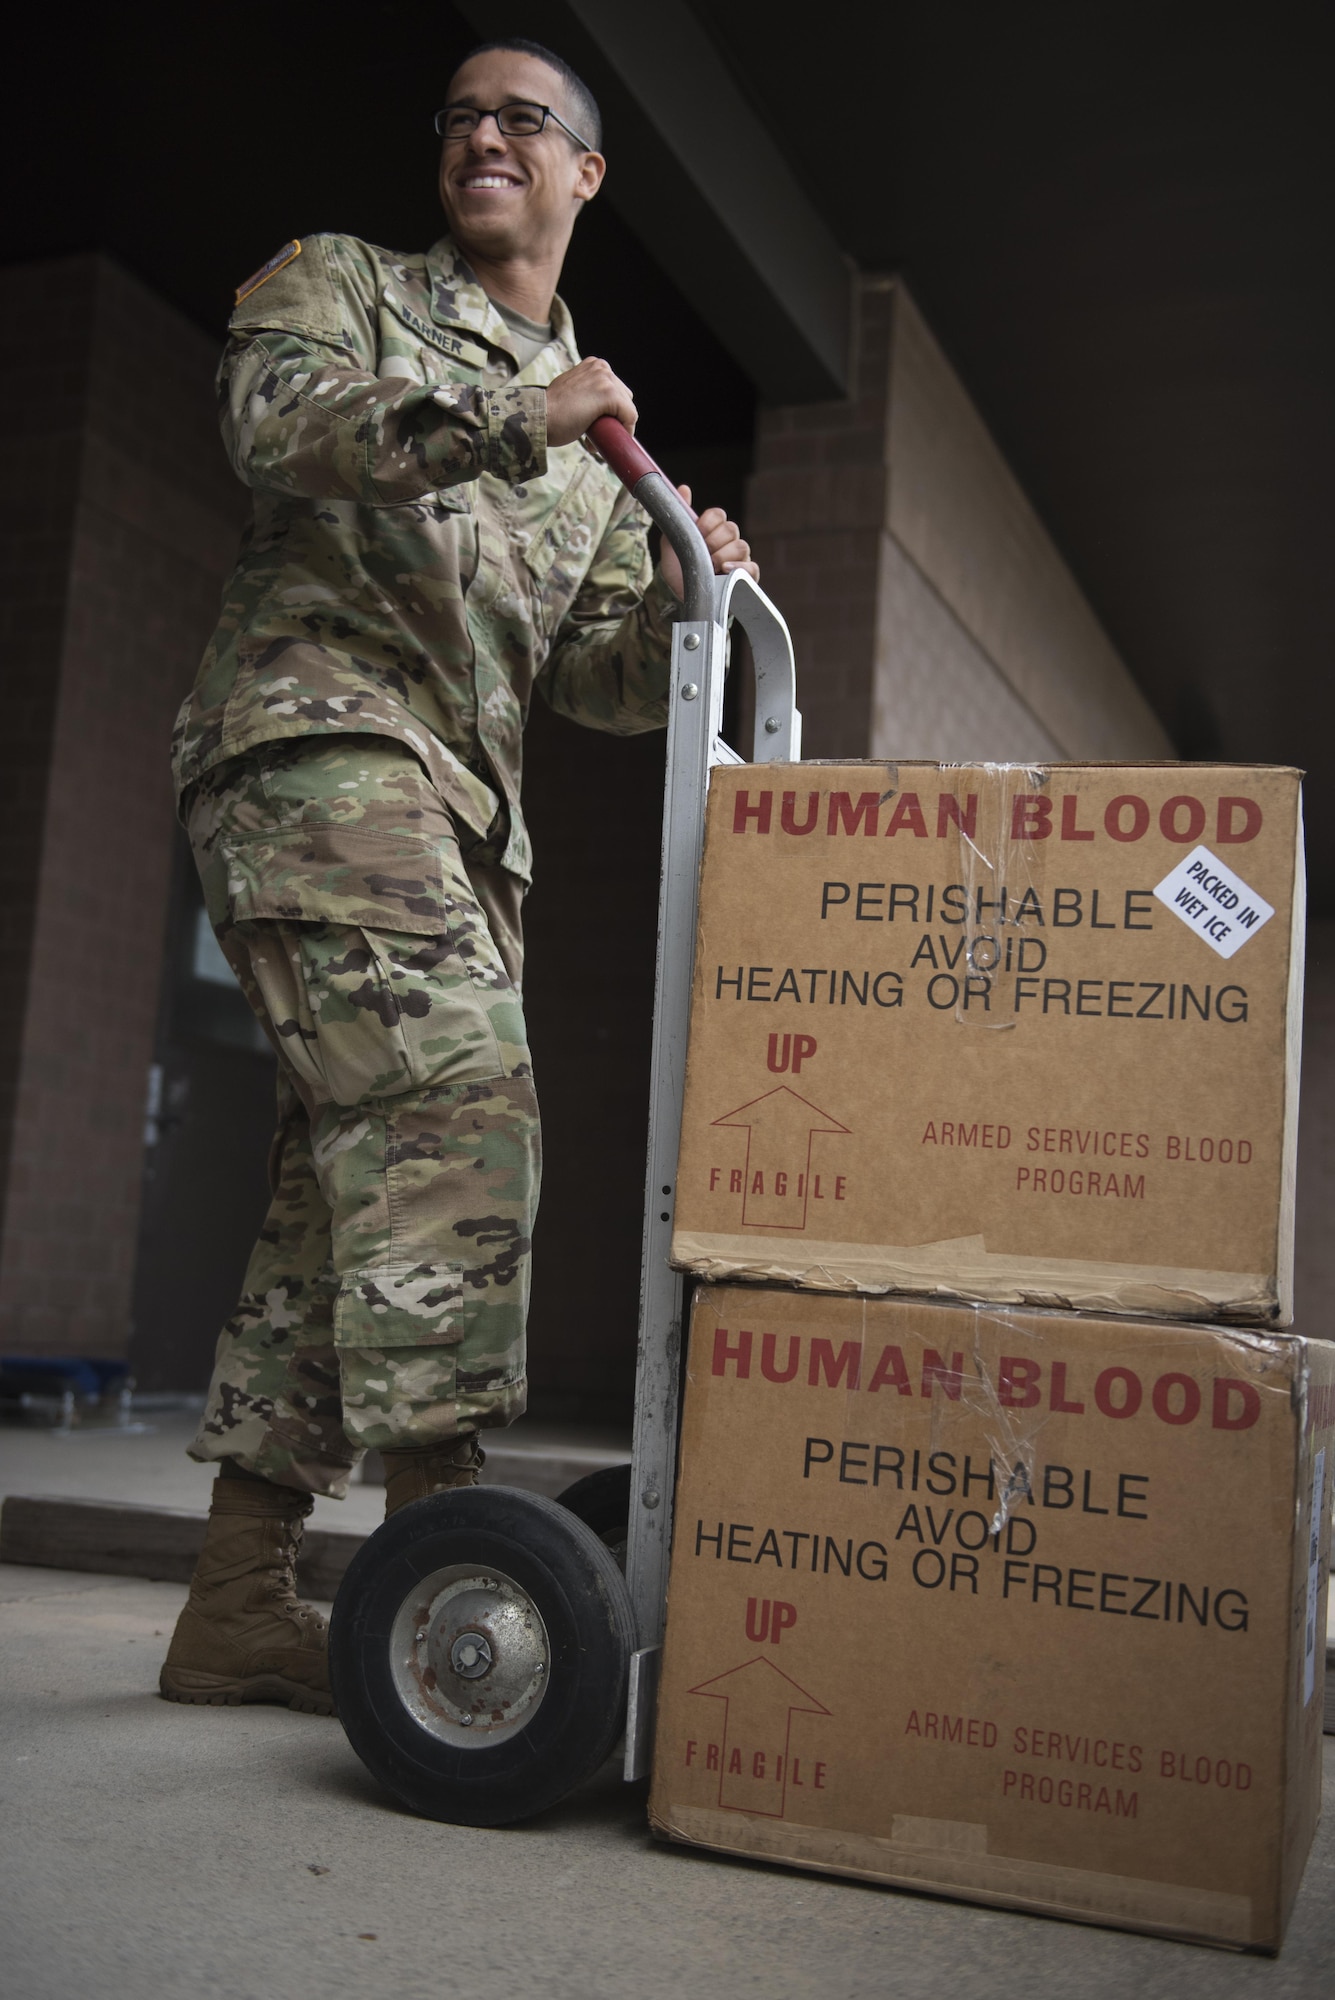 U.S. Army Specialist Shawn Warner, ASWBPL-East laboratory technician, retrieves a shipment of blood at the ASWBPL, Joint Base McGuire-Dix-Lakehurst, N.J., Oct. 21, 2016. The ASWBPL stores between 3500 and 4000 blood products in preparation for both man made and natural disasters.